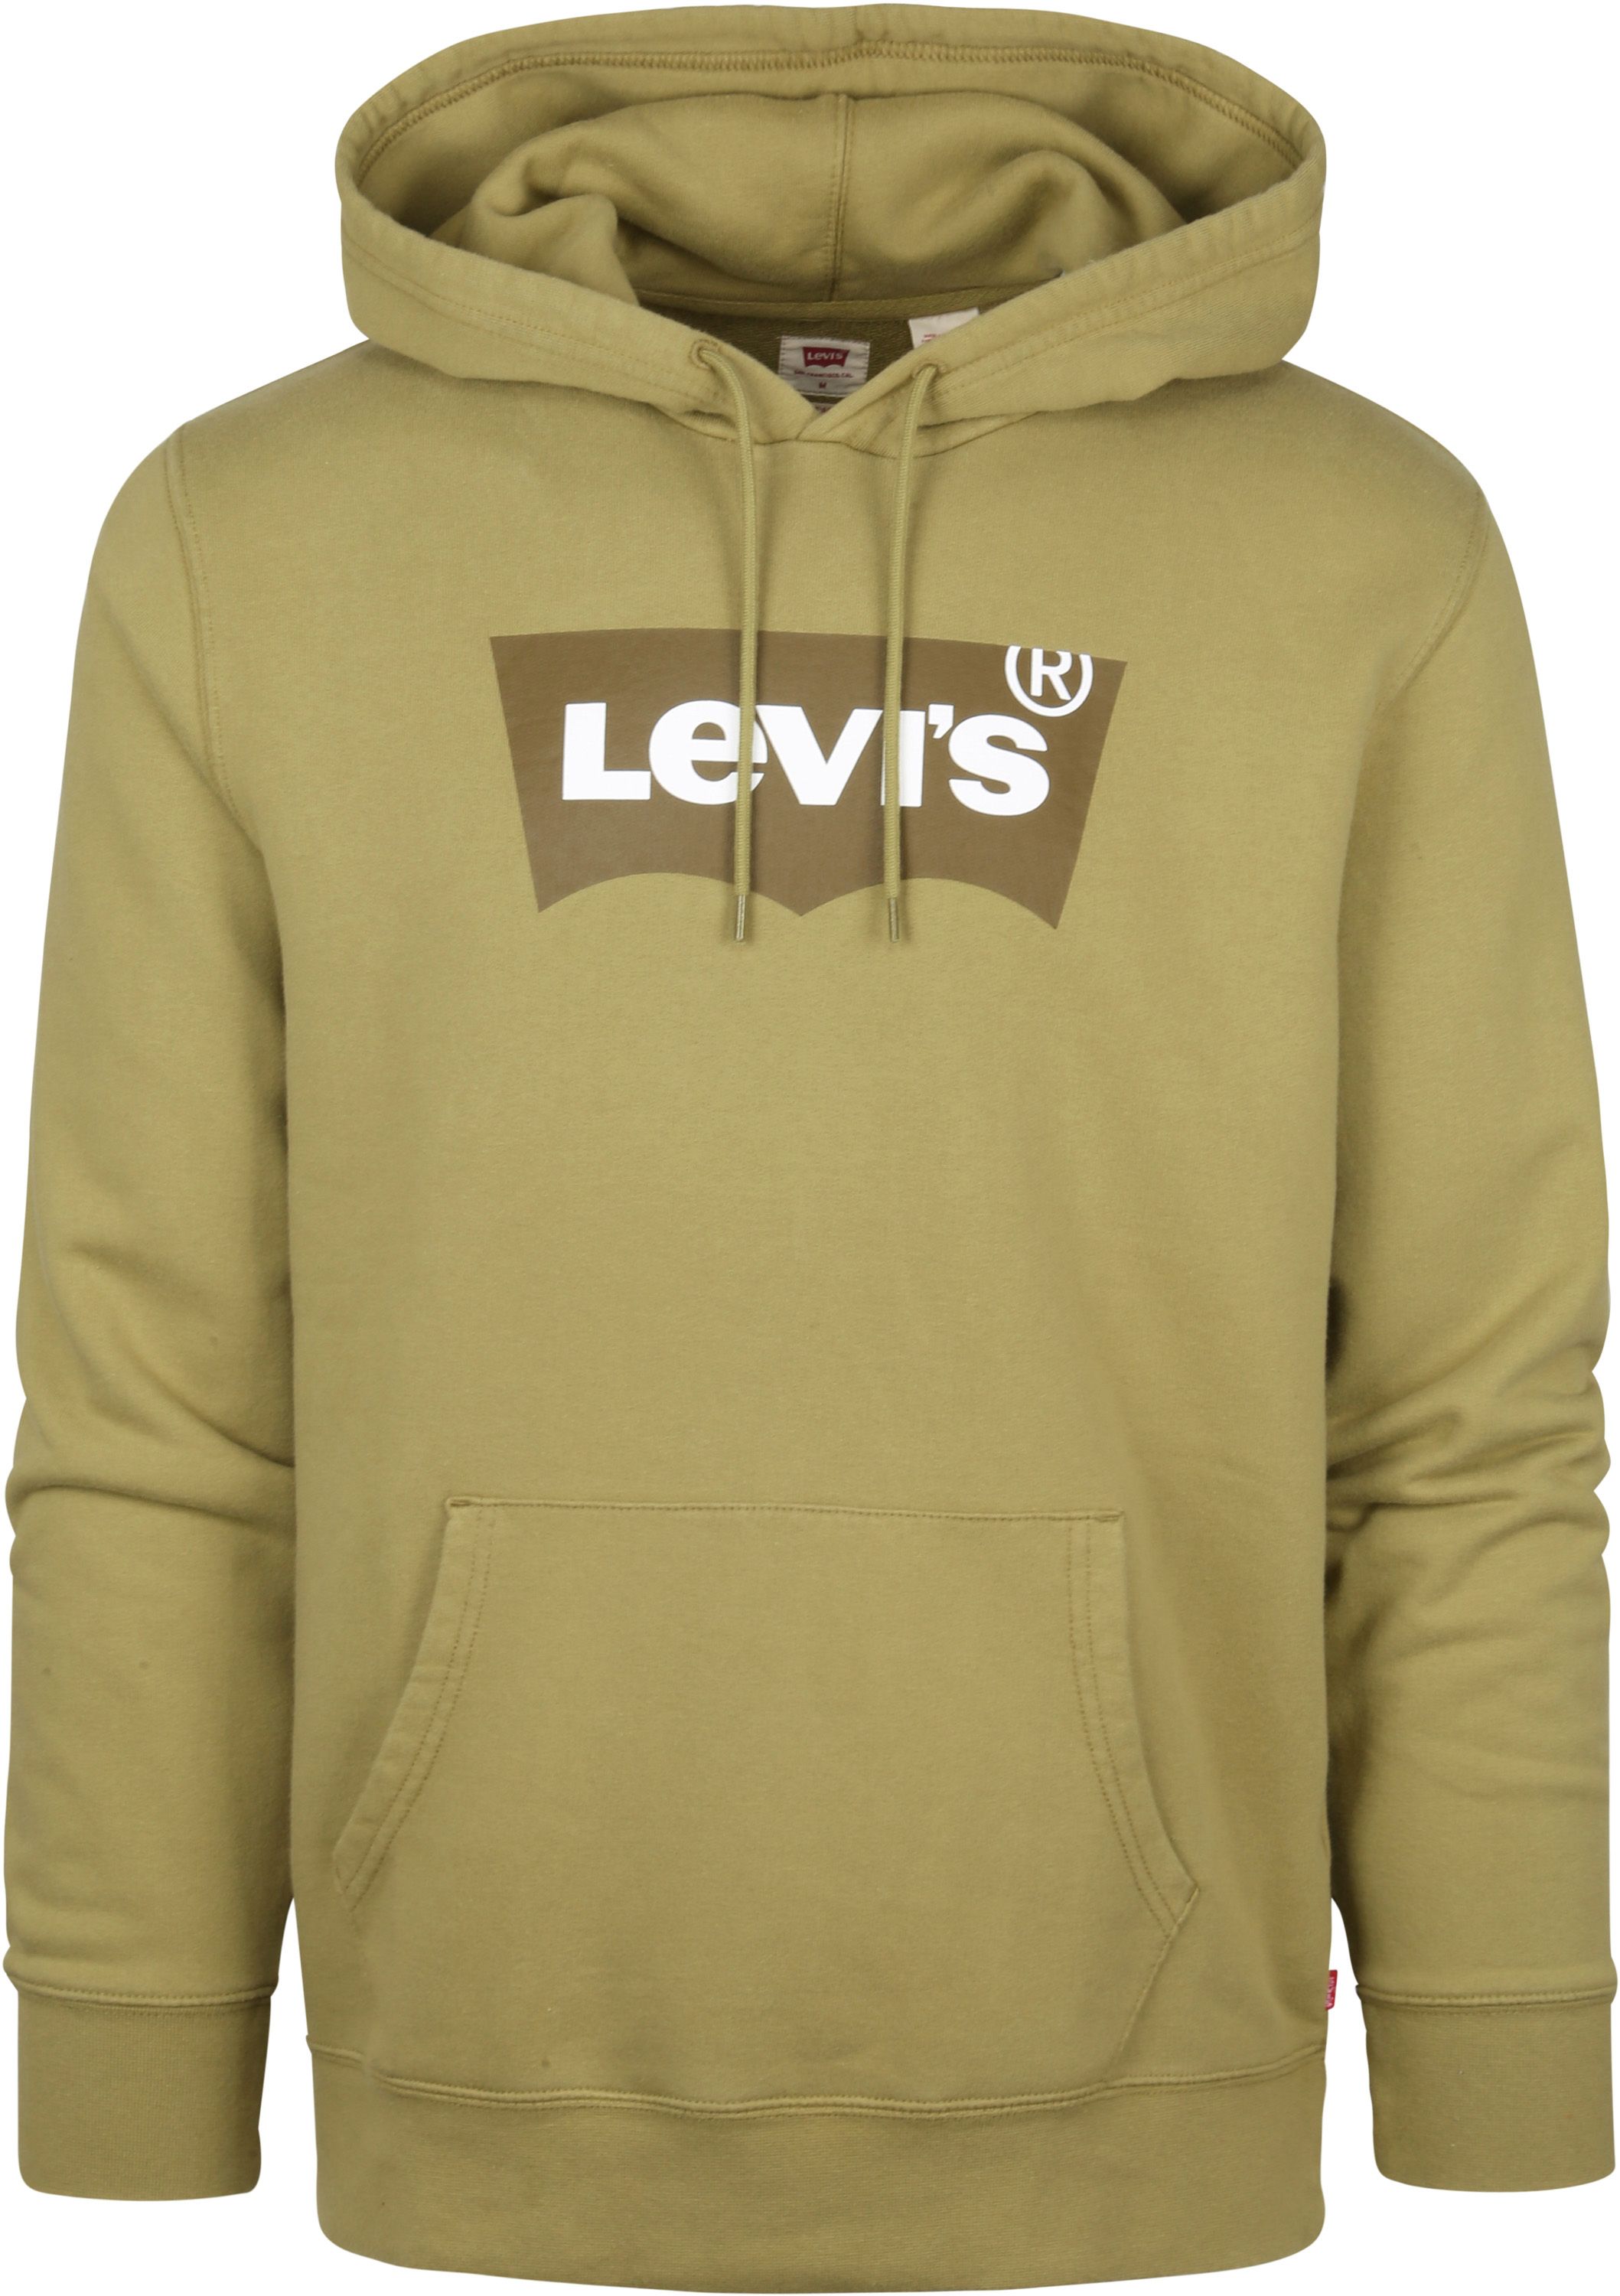 Levi's Graphic Hoodie Green size L